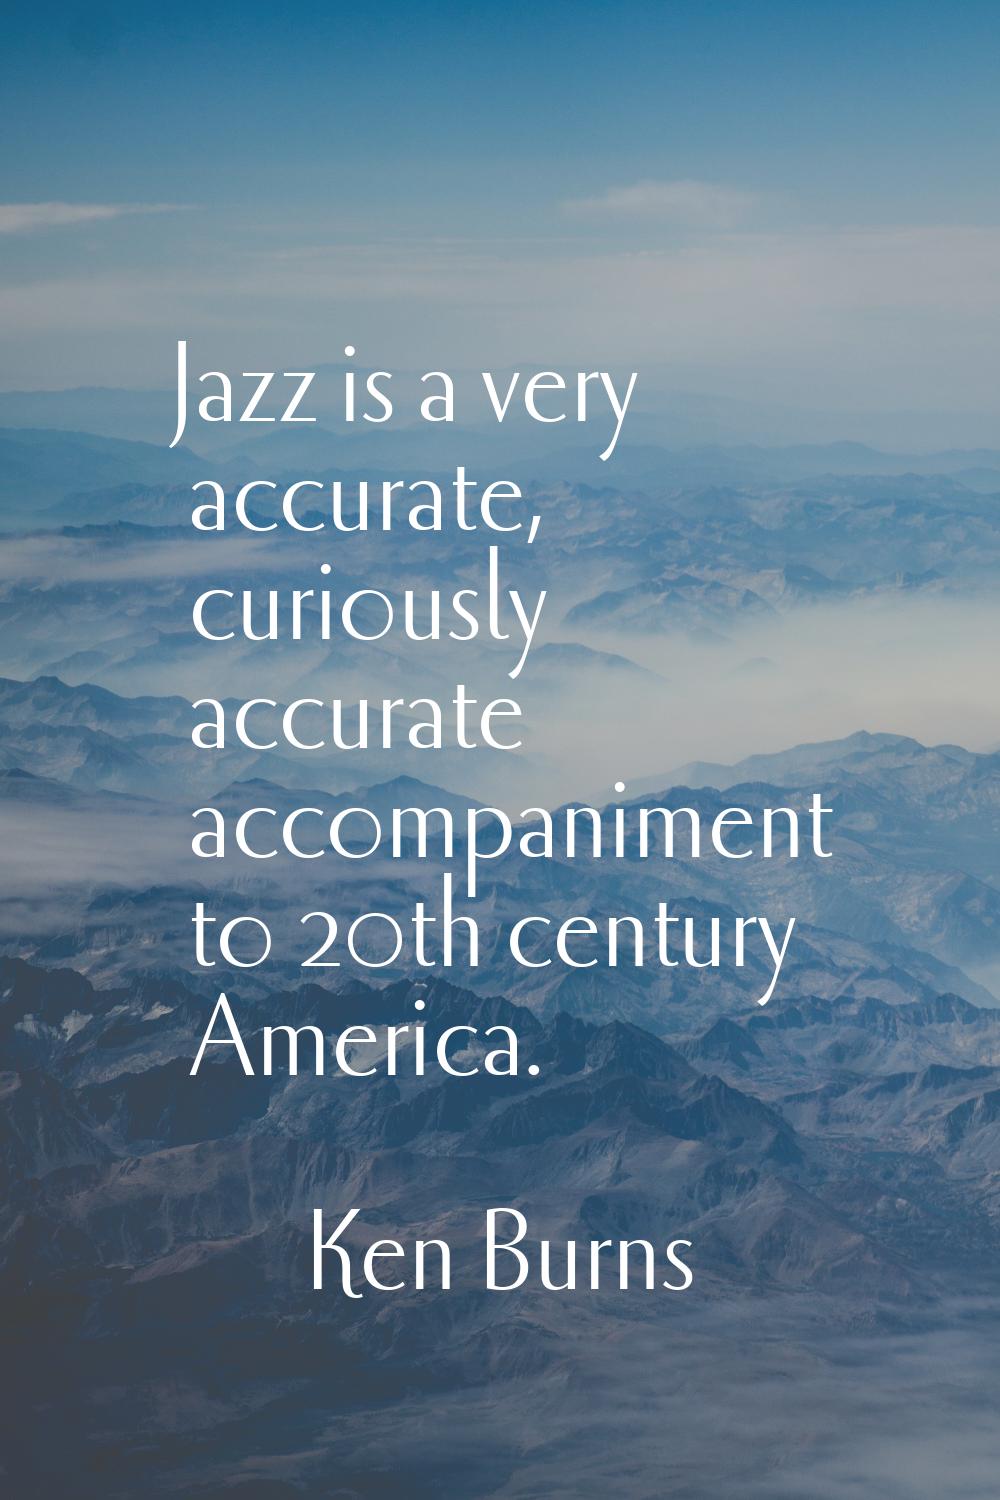 Jazz is a very accurate, curiously accurate accompaniment to 20th century America.